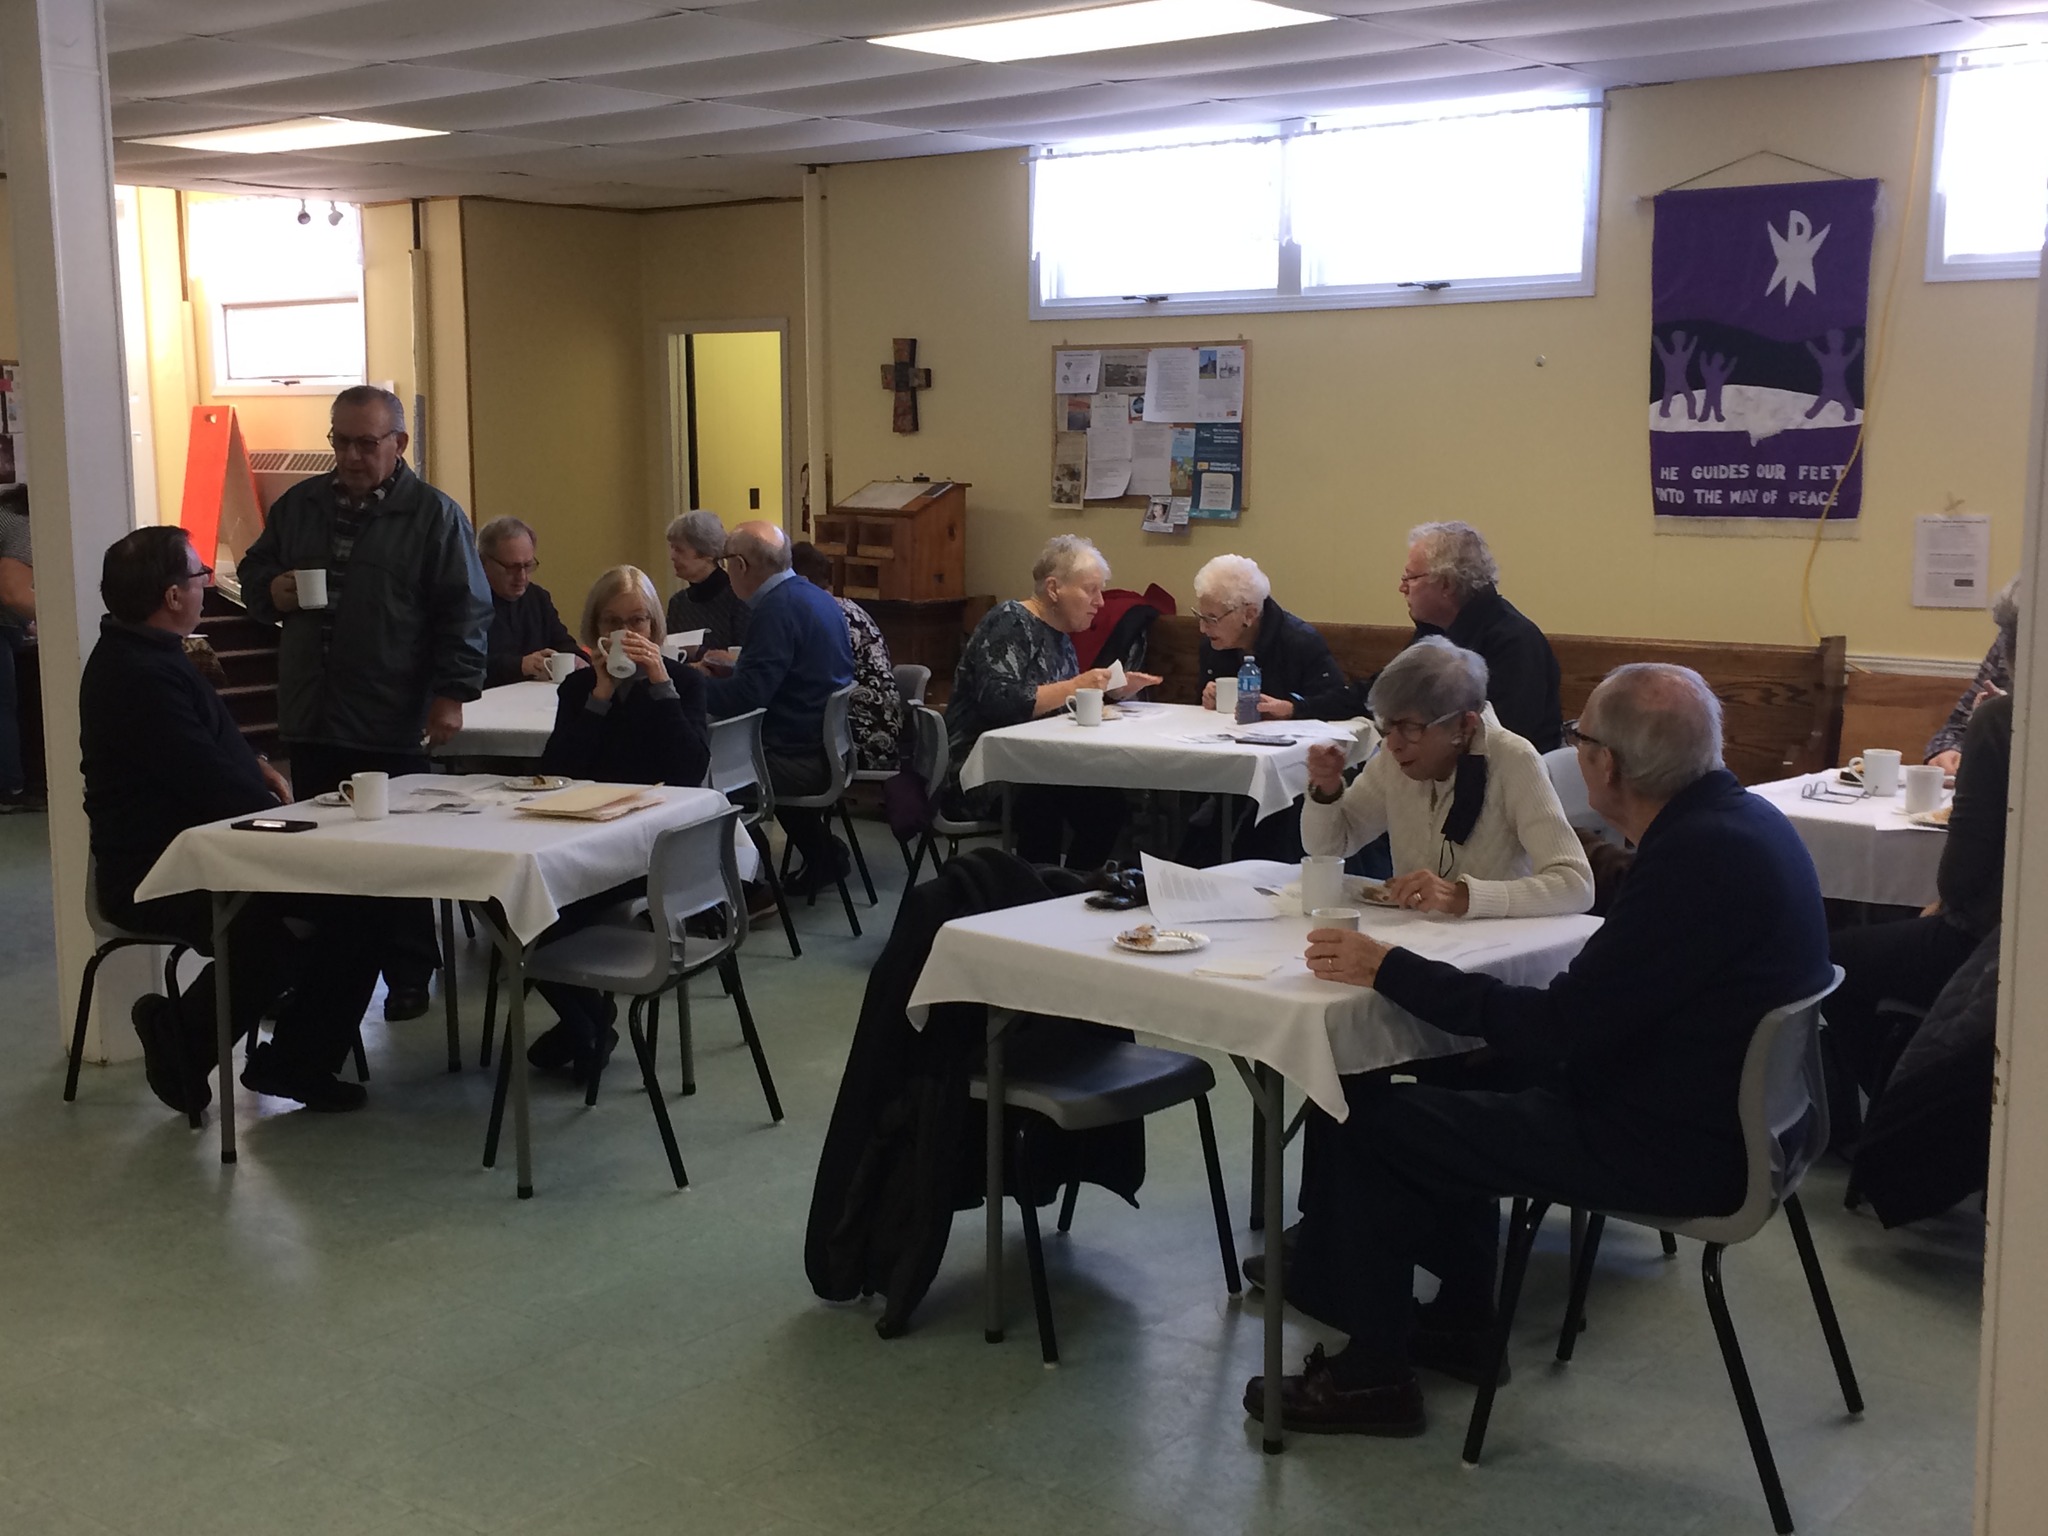 Another successful Cafe Church was held on February 25th. Thanks to everyone who makes these services possible.